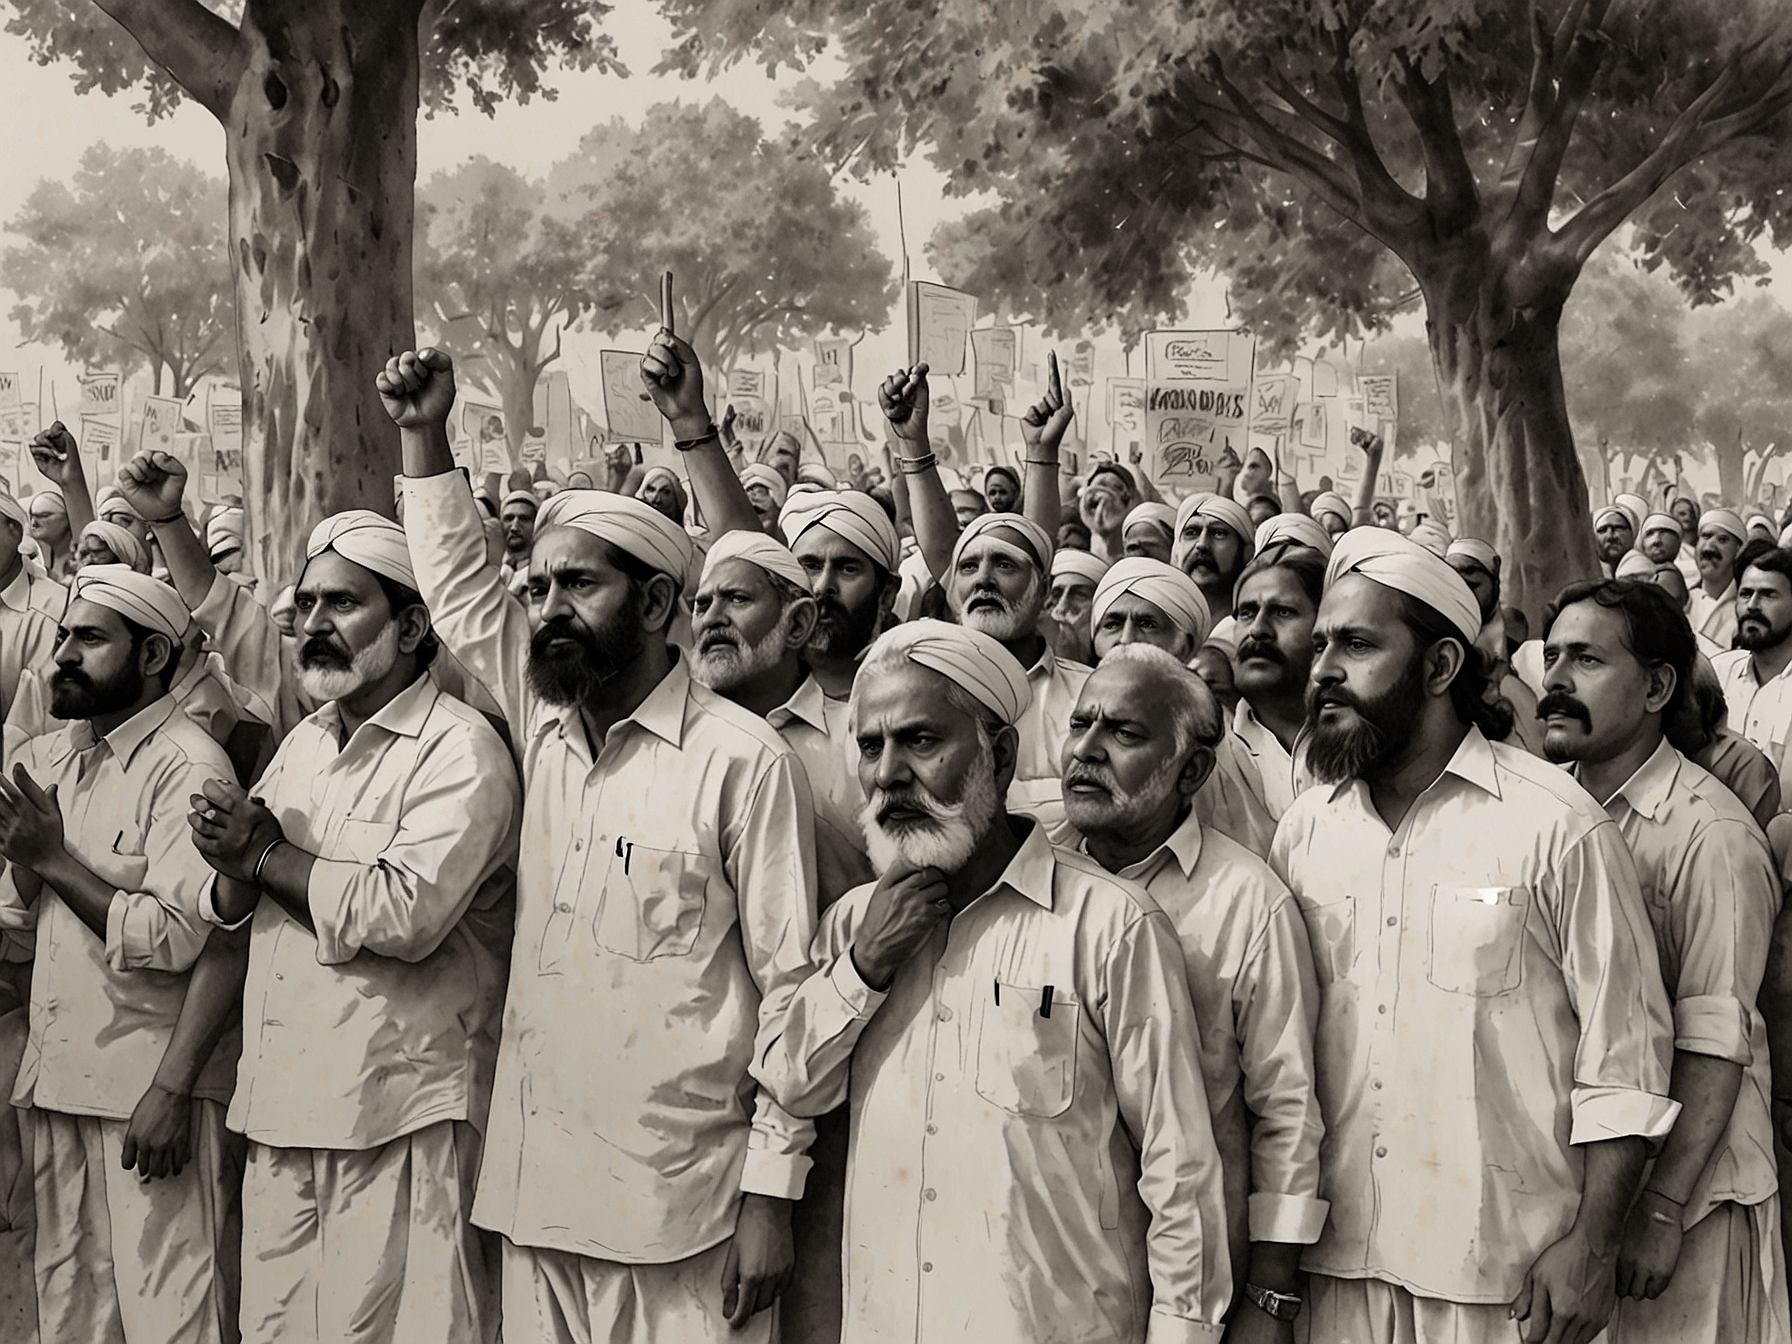 A crowd of VHP members gathered at Jantar Mantar, chanting slogans in defense of Indian sovereignty, illustrating the tension between domestic unity and expressions of global solidarity.